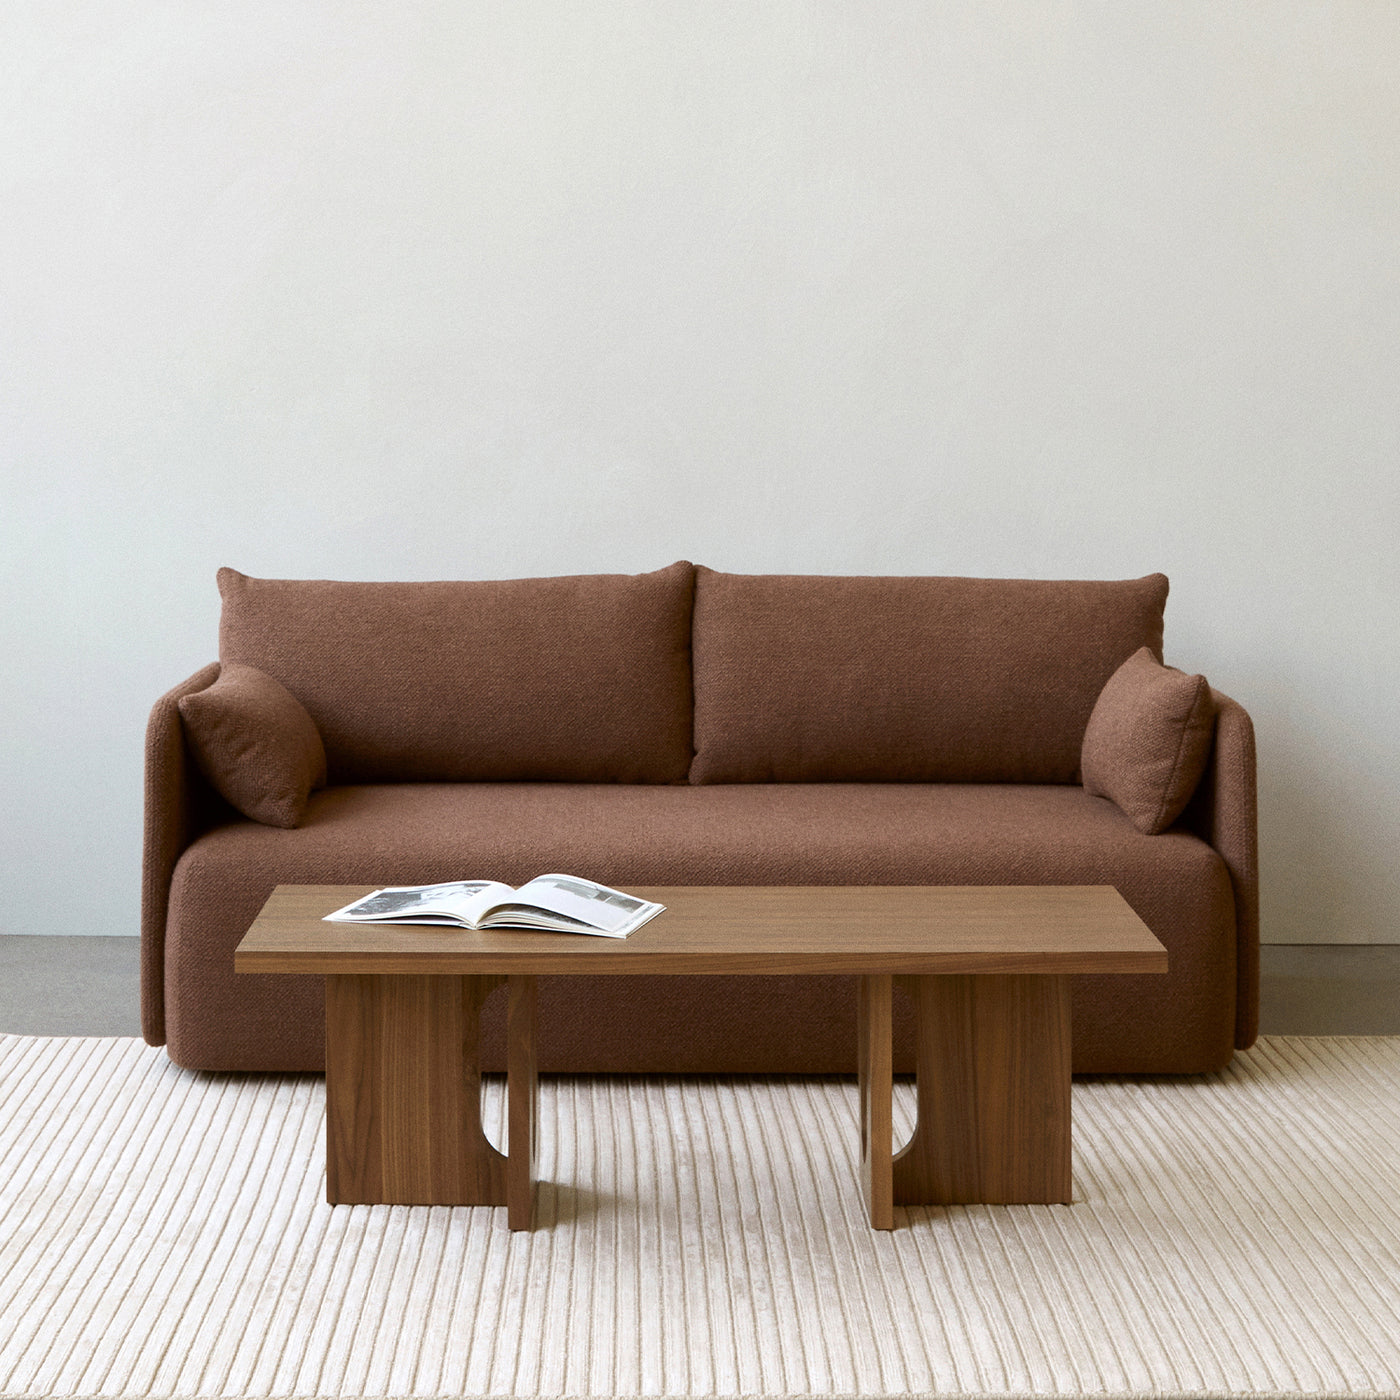 ANDROGYNE lounge table